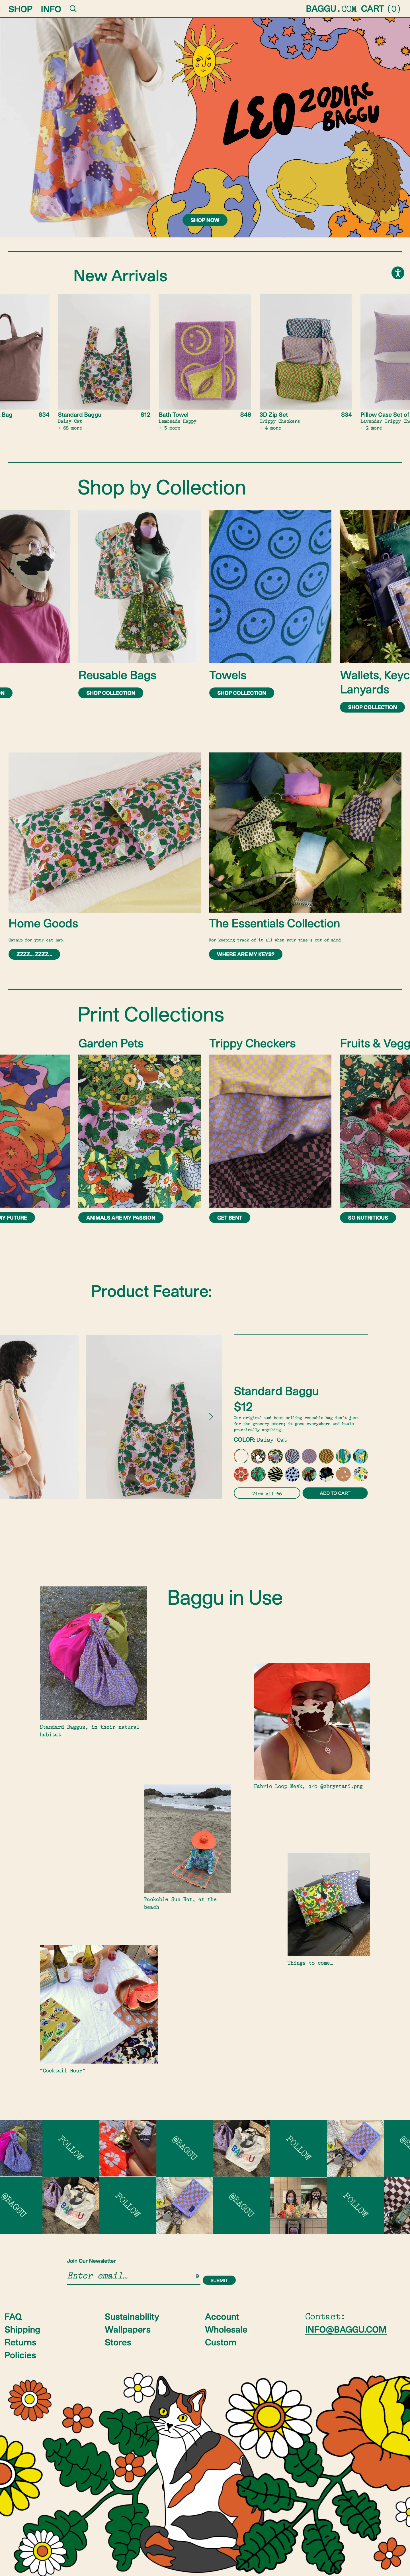 BAGGU Landing Page Example: BAGGU makes simple, intentional things for everyday use.